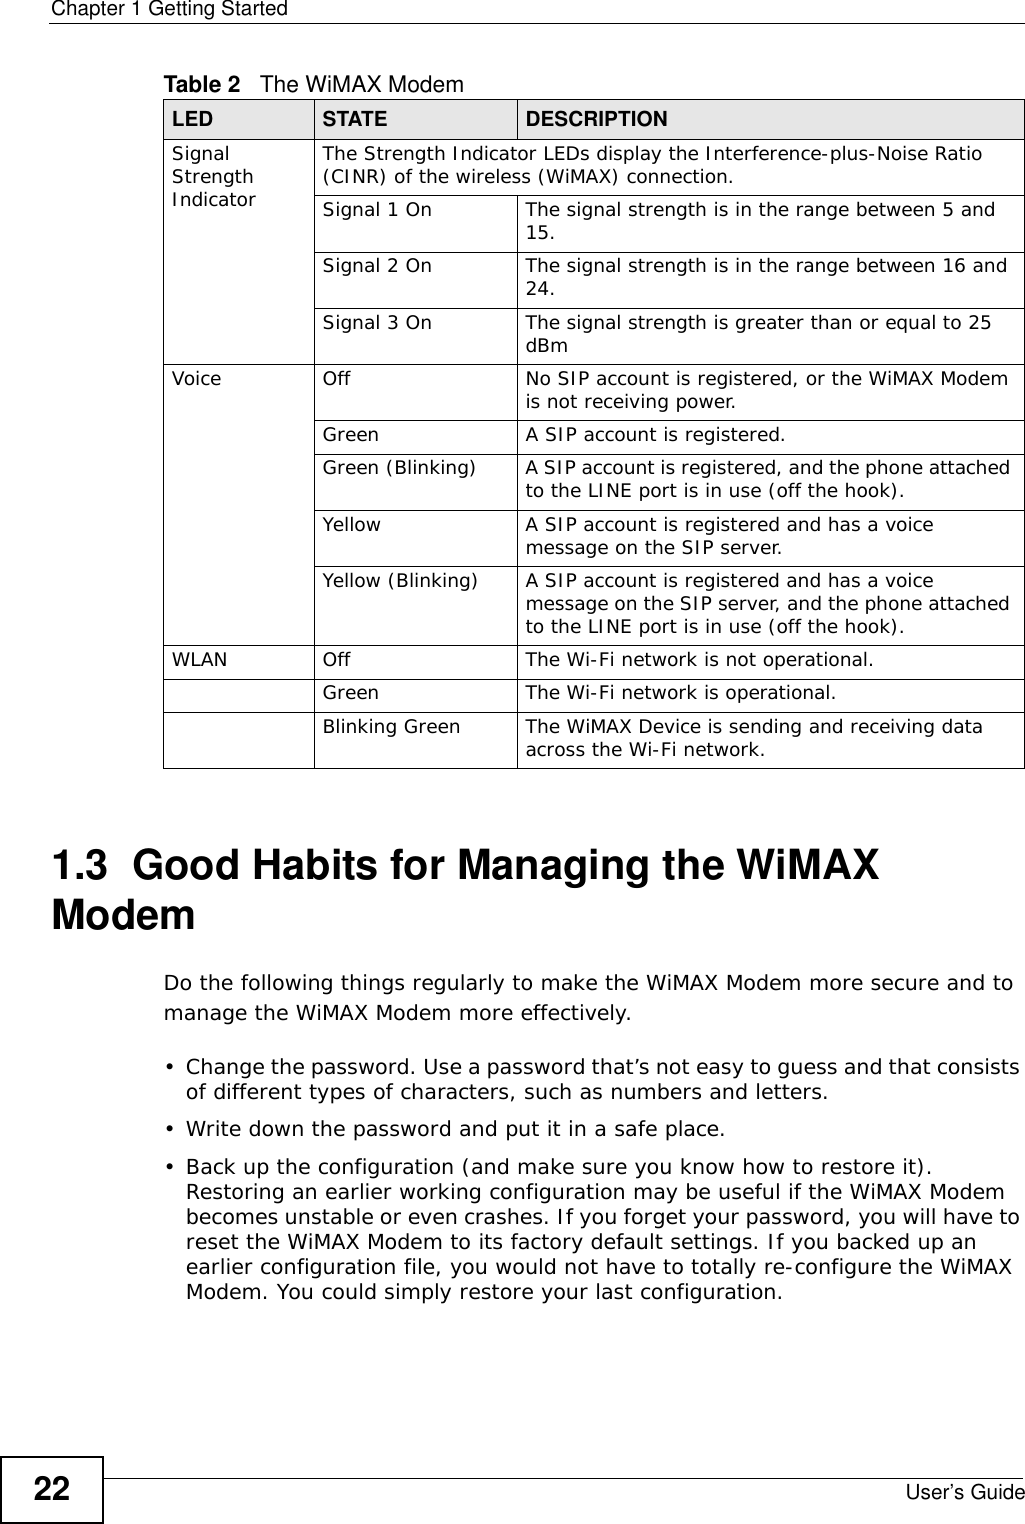 Chapter 1 Getting StartedUser’s Guide221.3  Good Habits for Managing the WiMAX ModemDo the following things regularly to make the WiMAX Modem more secure and to manage the WiMAX Modem more effectively.• Change the password. Use a password that’s not easy to guess and that consists of different types of characters, such as numbers and letters.• Write down the password and put it in a safe place.• Back up the configuration (and make sure you know how to restore it). Restoring an earlier working configuration may be useful if the WiMAX Modem becomes unstable or even crashes. If you forget your password, you will have to reset the WiMAX Modem to its factory default settings. If you backed up an earlier configuration file, you would not have to totally re-configure the WiMAX Modem. You could simply restore your last configuration.Signal Strength IndicatorThe Strength Indicator LEDs display the Interference-plus-Noise Ratio (CINR) of the wireless (WiMAX) connection.Signal 1 On The signal strength is in the range between 5 and 15.Signal 2 On The signal strength is in the range between 16 and 24.Signal 3 On The signal strength is greater than or equal to 25 dBmVoice Off No SIP account is registered, or the WiMAX Modem is not receiving power.Green A SIP account is registered.Green (Blinking) A SIP account is registered, and the phone attached to the LINE port is in use (off the hook).Yellow A SIP account is registered and has a voice message on the SIP server.Yellow (Blinking) A SIP account is registered and has a voice message on the SIP server, and the phone attached to the LINE port is in use (off the hook).WLAN Off The Wi-Fi network is not operational.Green The Wi-Fi network is operational.Blinking Green The WiMAX Device is sending and receiving data across the Wi-Fi network.Table 2   The WiMAX ModemLED STATE DESCRIPTION